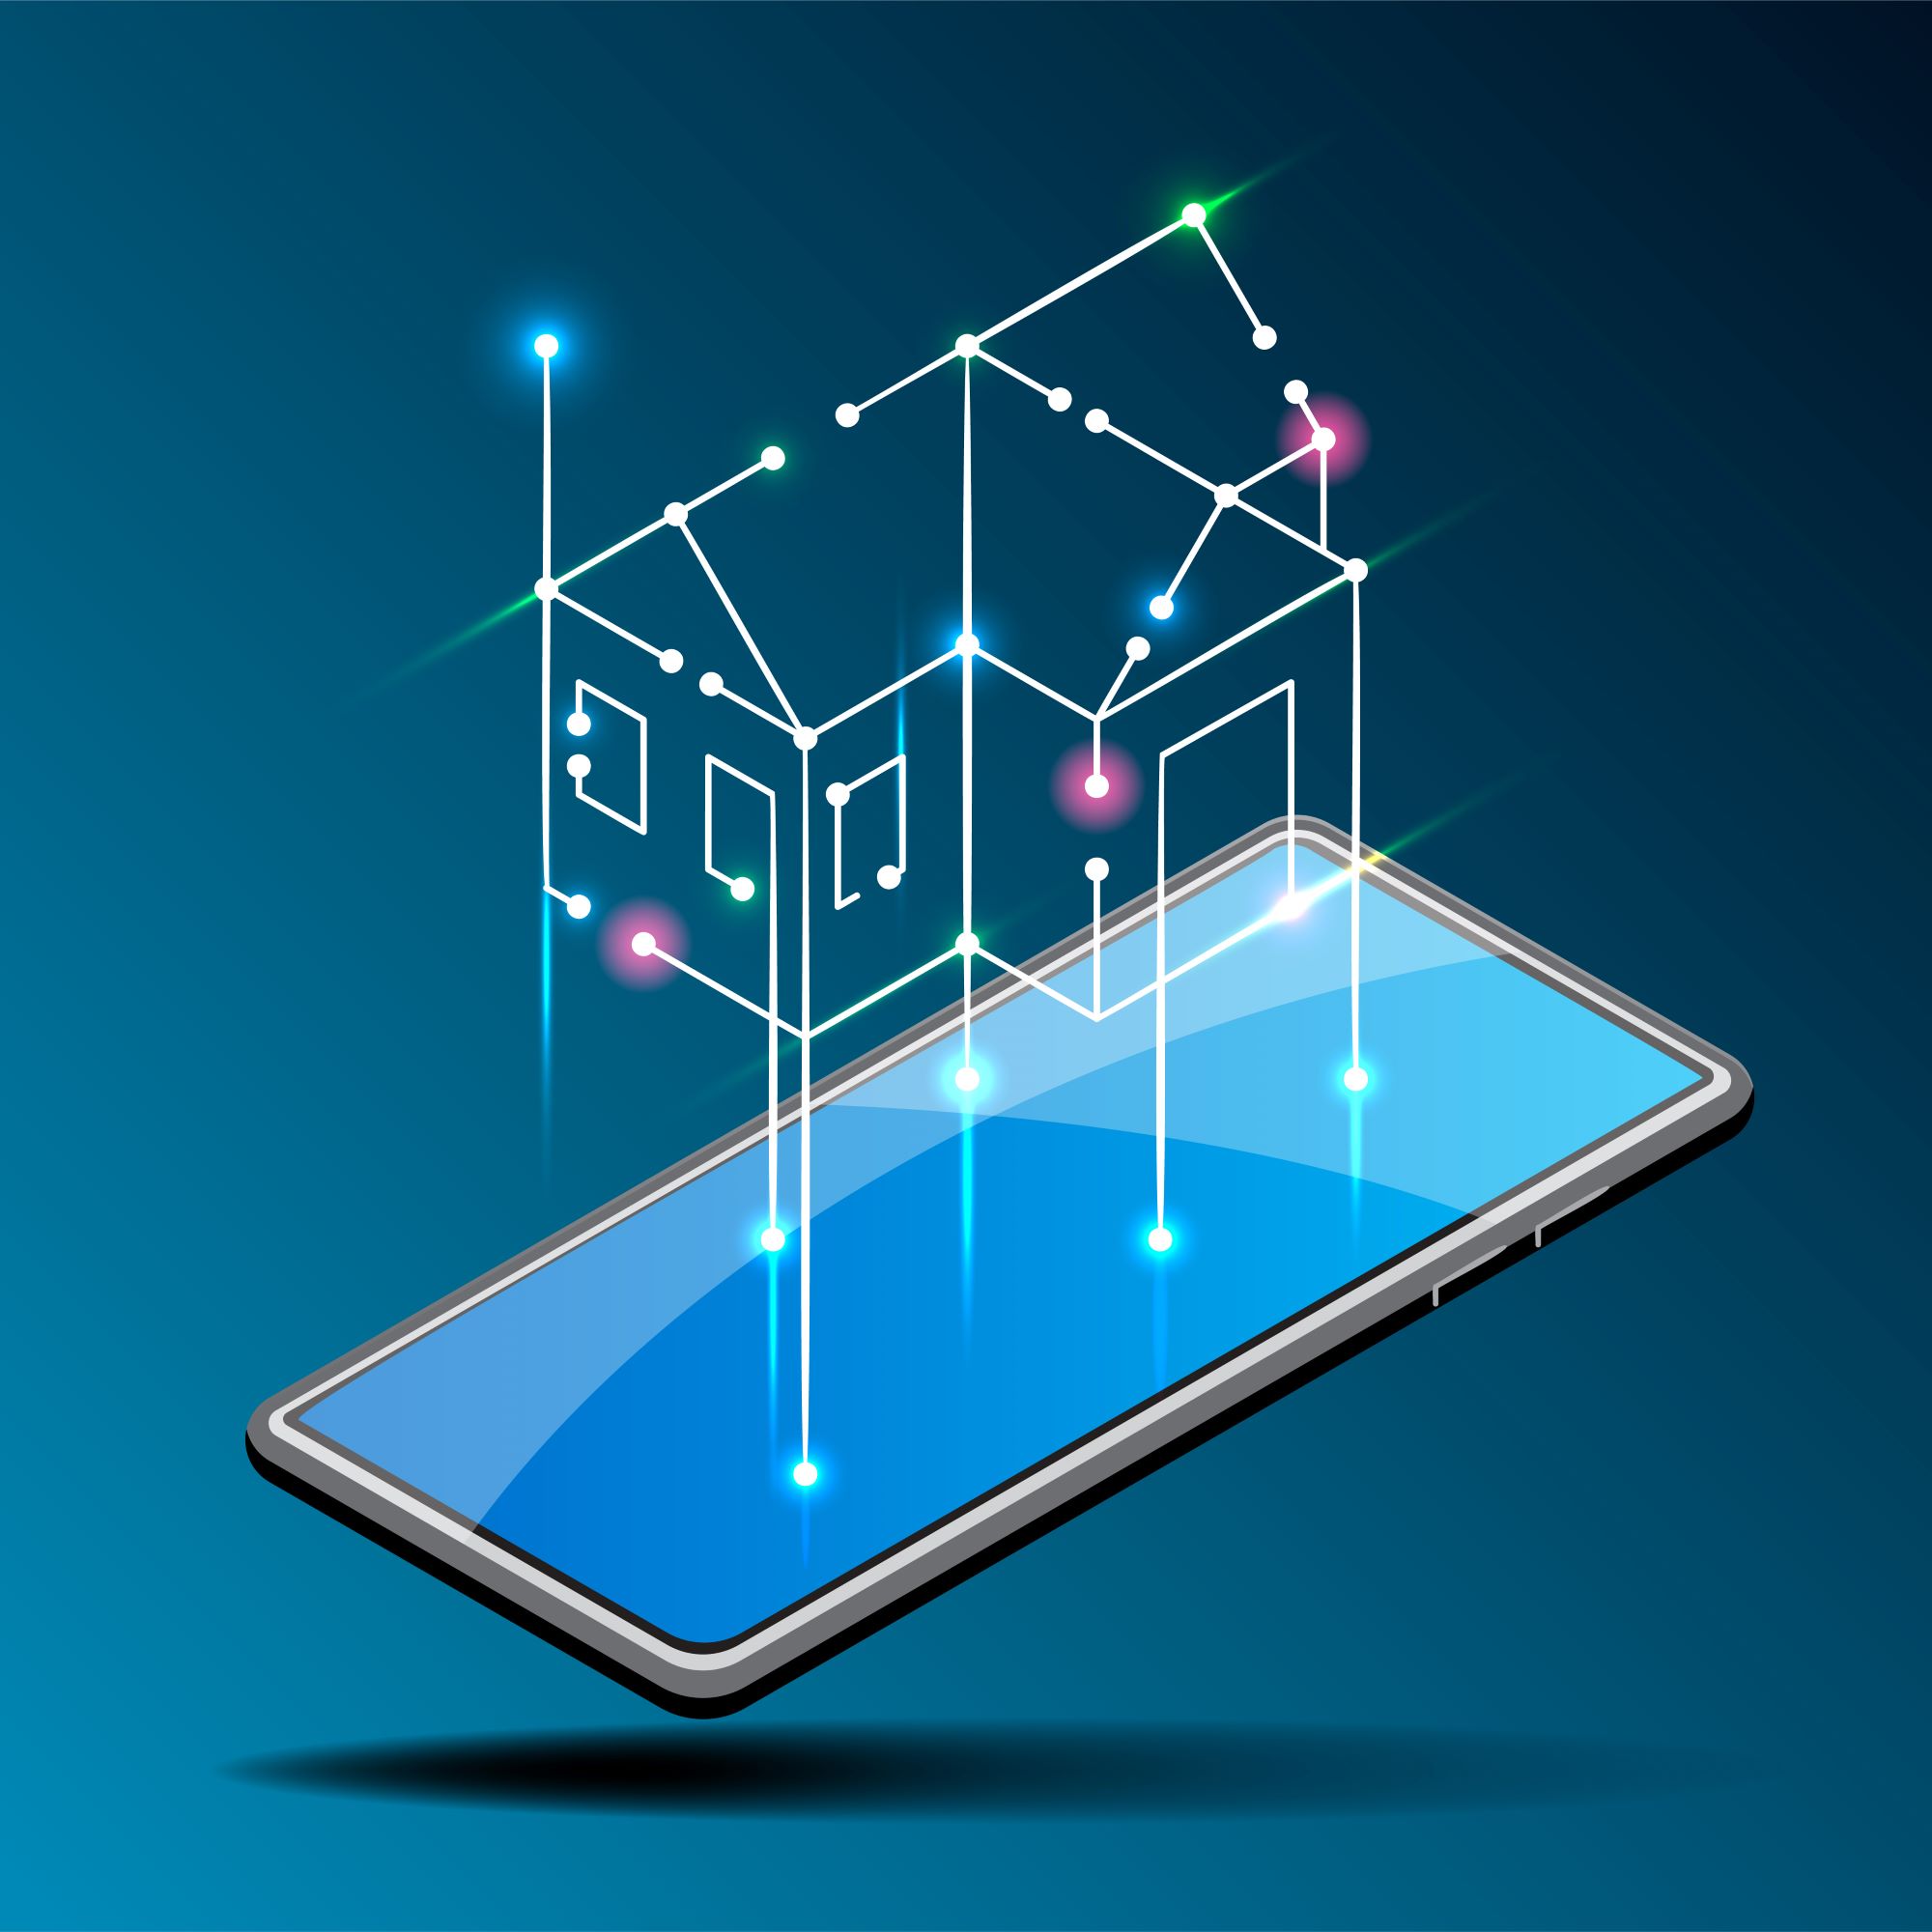 Smarter buildings with cloud services – building automation is facing a transformation